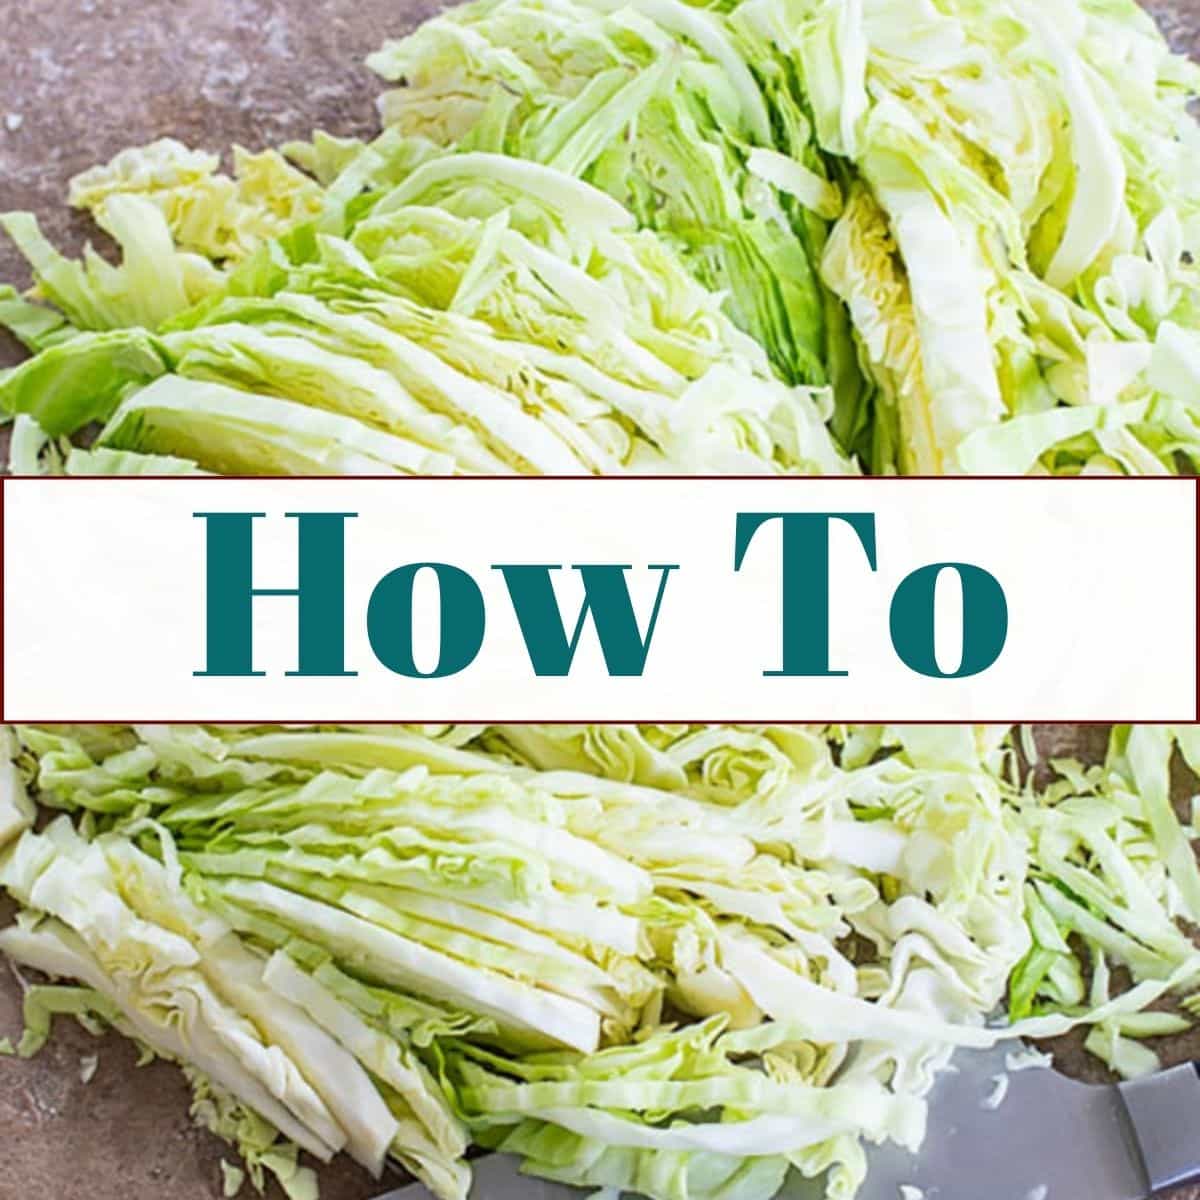 Cut cabbage as the backdrop and then, the title of the category is "How To"